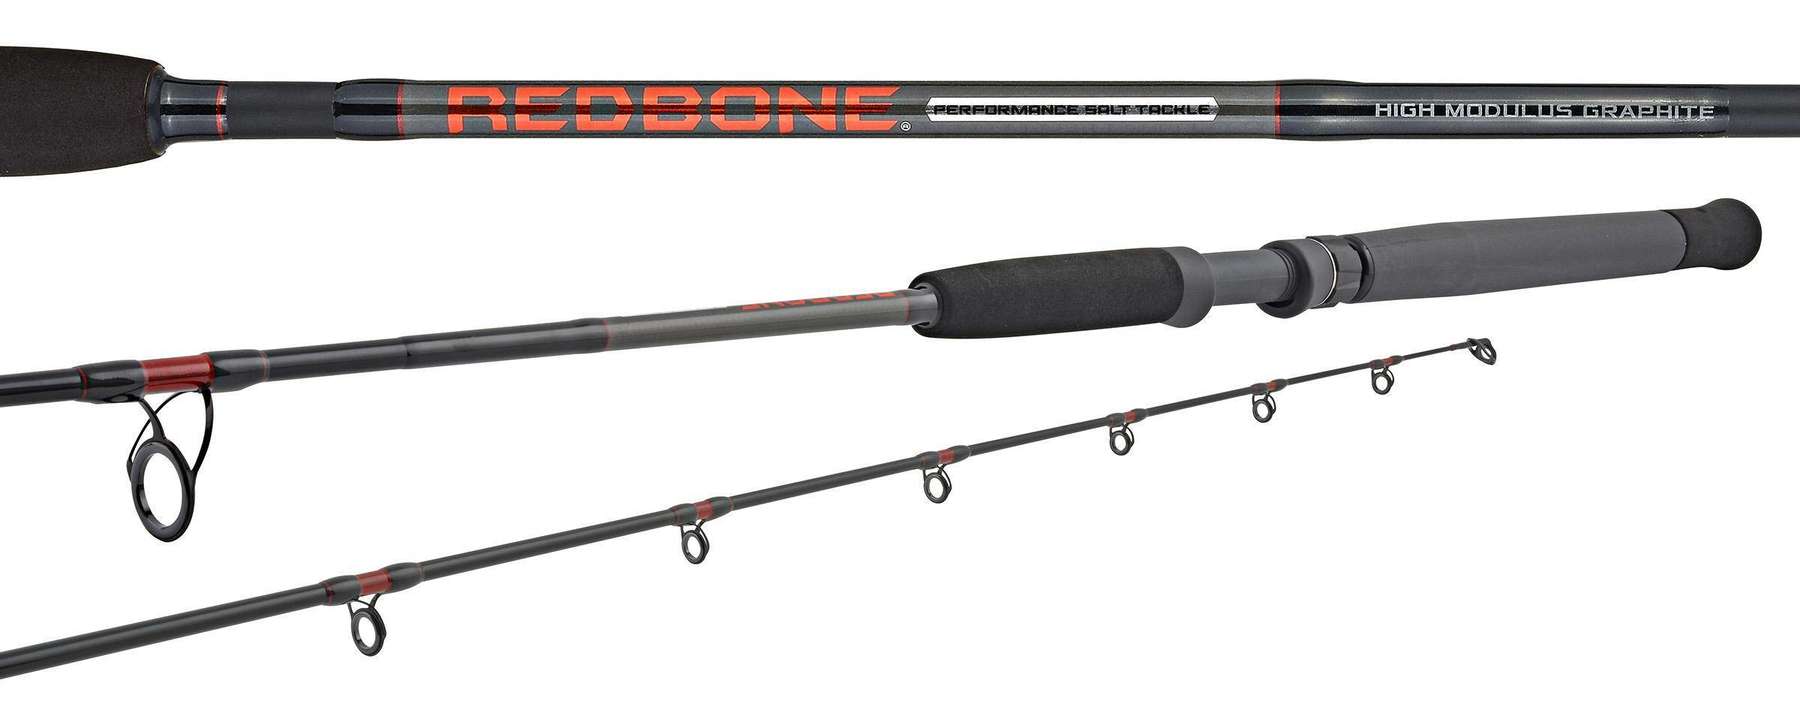 https://www.outdoorshopping.com/pimages/Hurricane-Redbone-7-1-Piece-Heavy-Off-Shore-Spin-Rod-17-40-Pounds-Fishing-130885464772832805.jpg